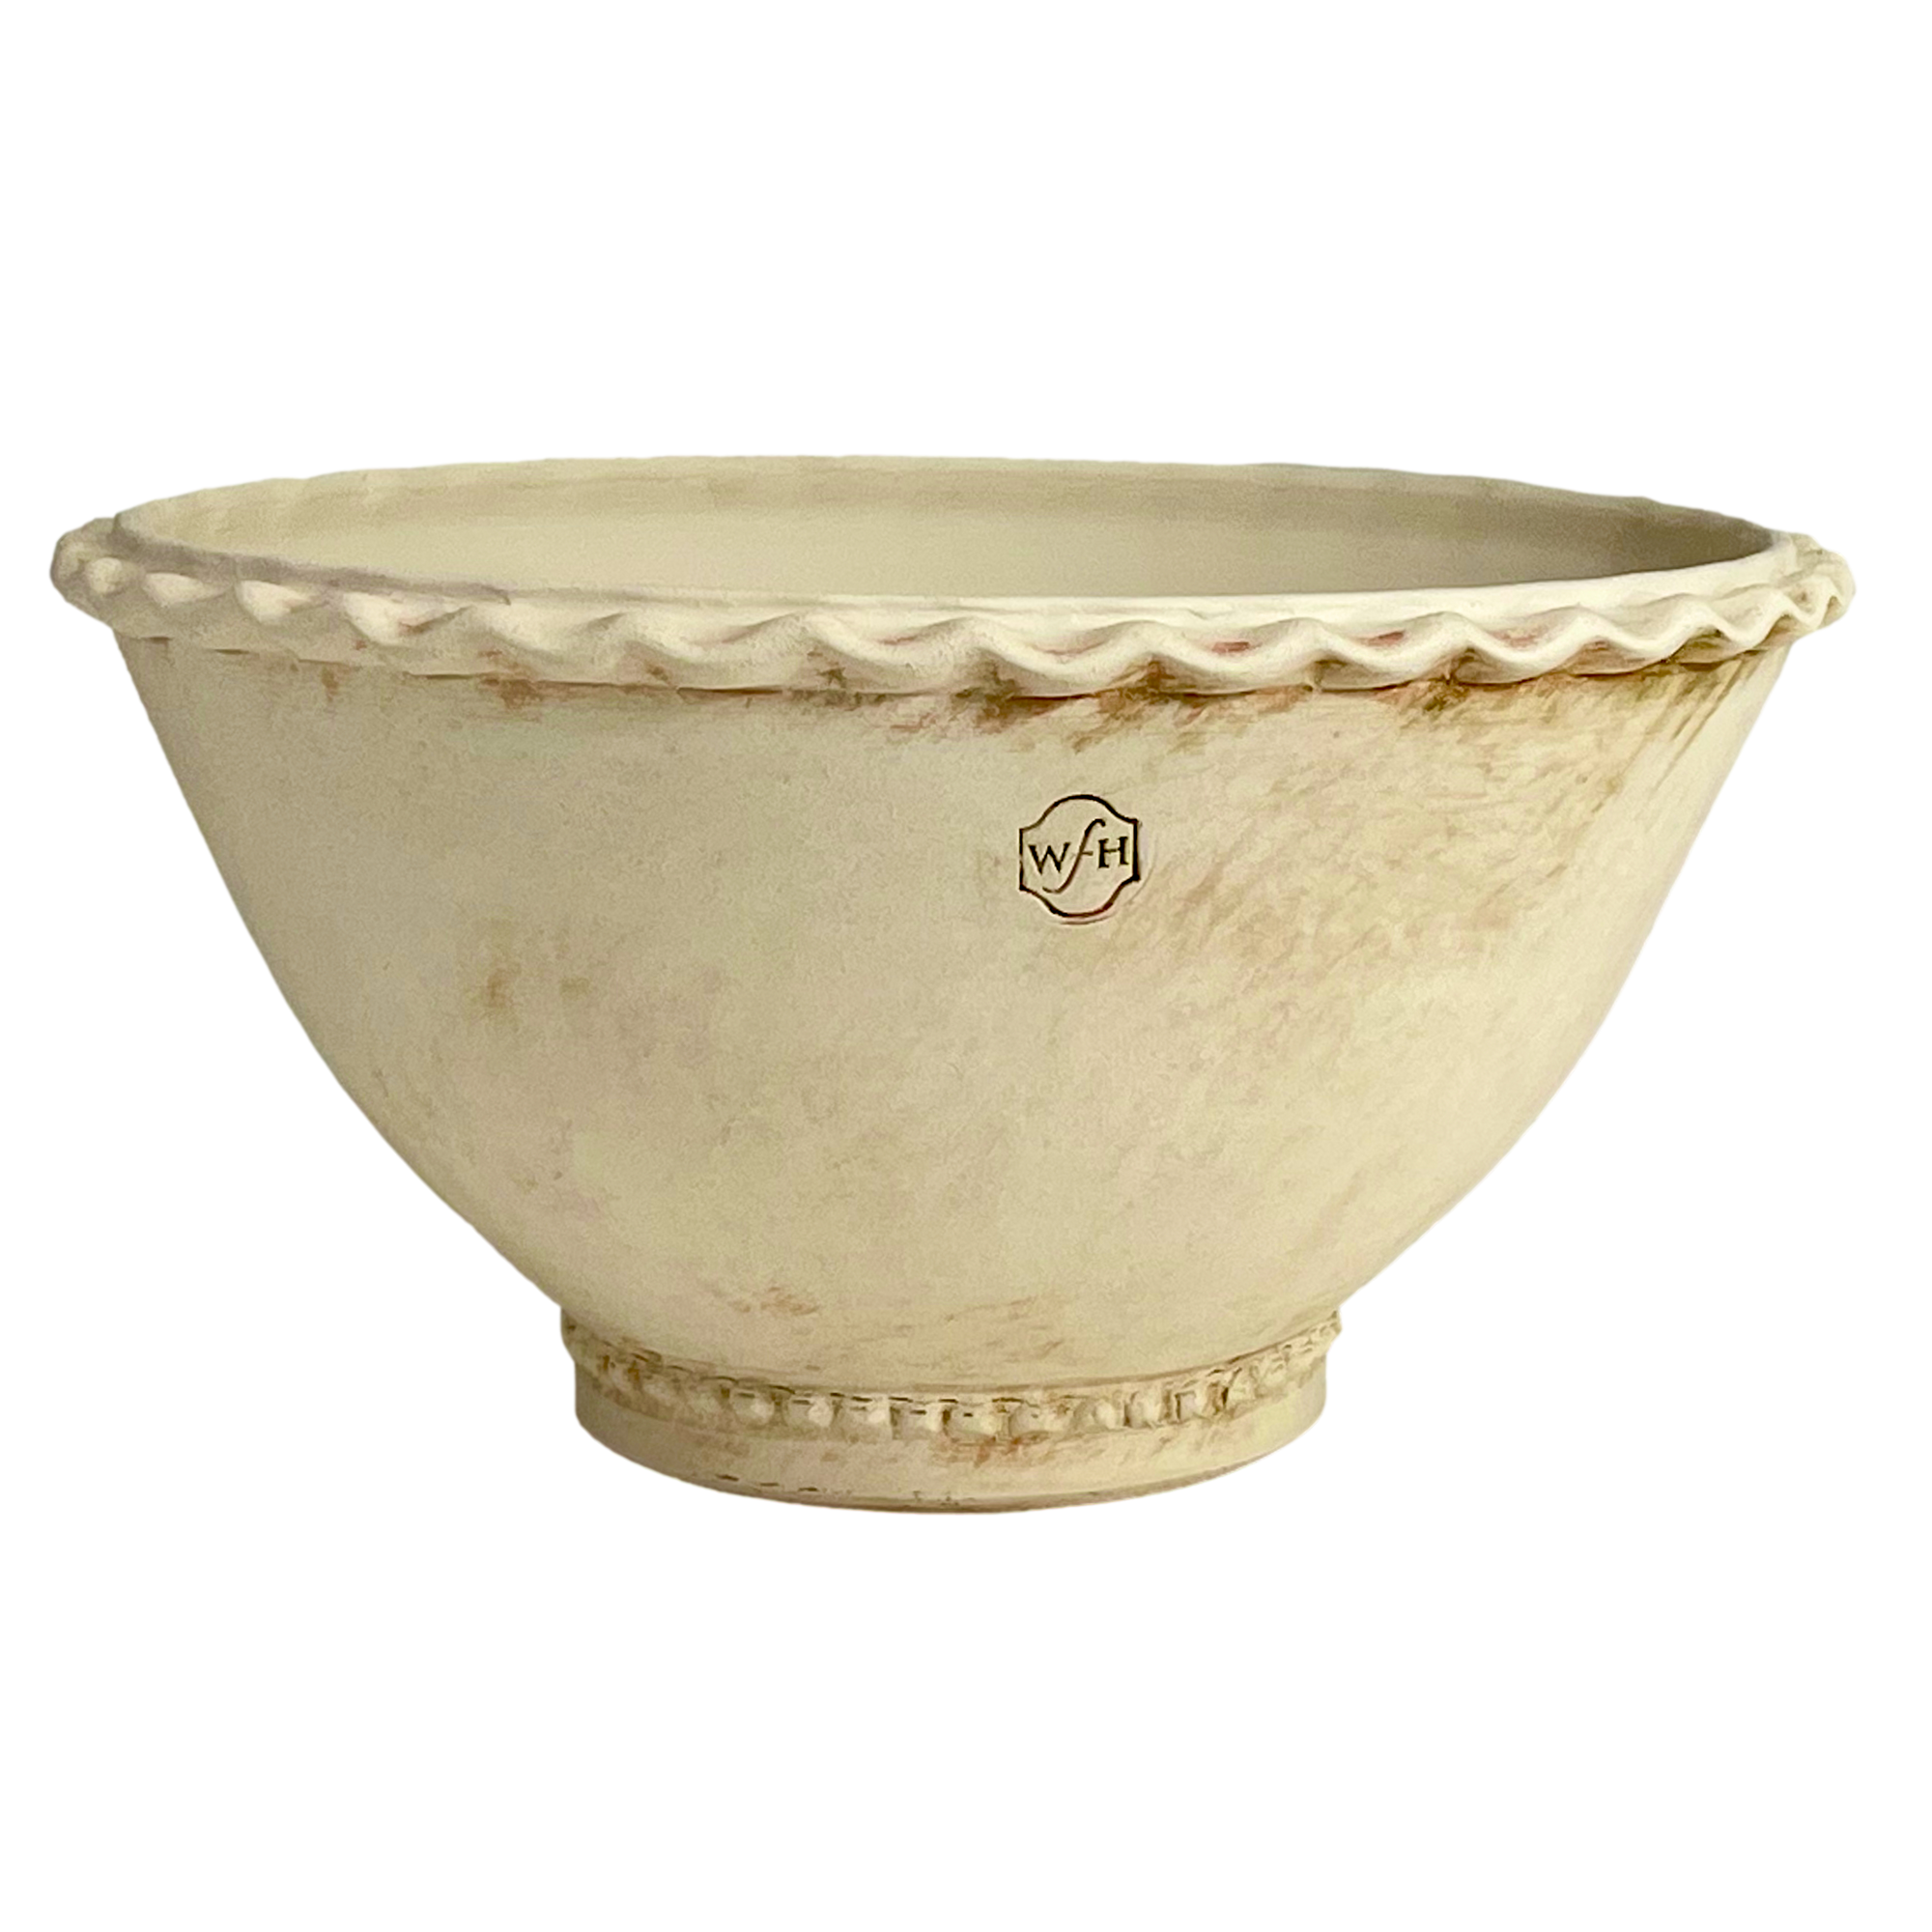 Pendarvis Bowl with Saucer